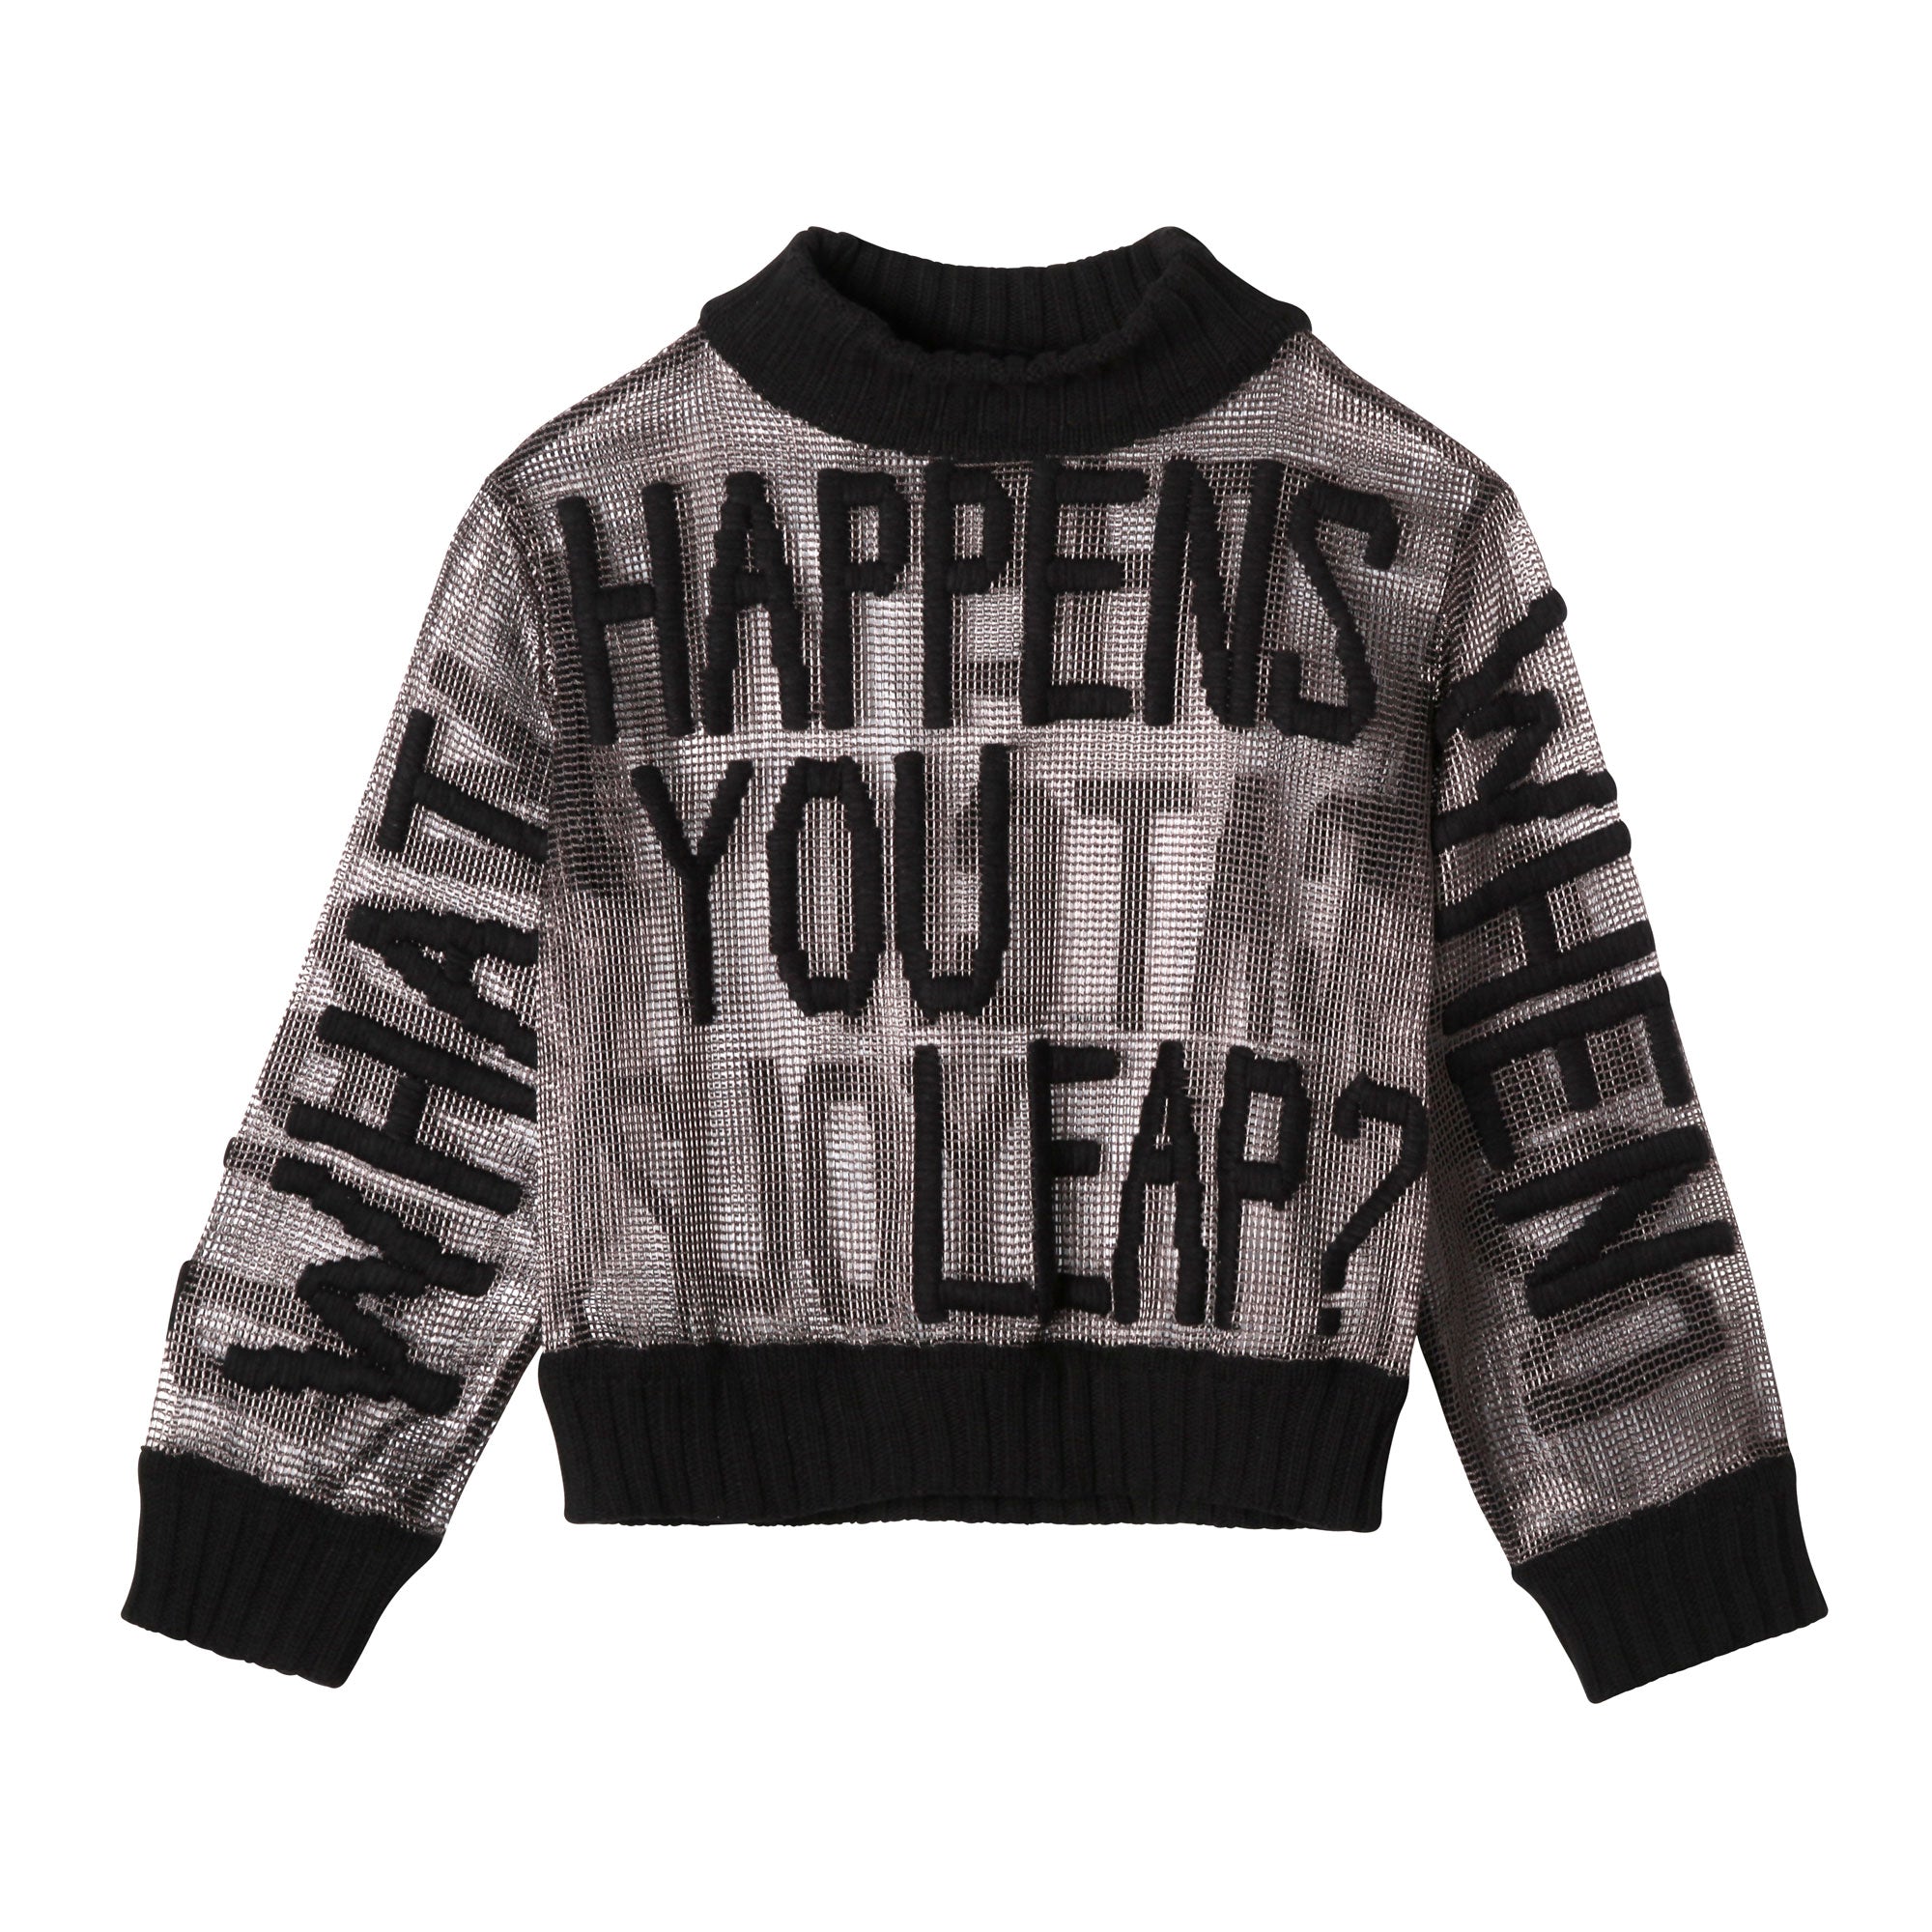 What Happens When You Leap? Hand Embroidered Sweater